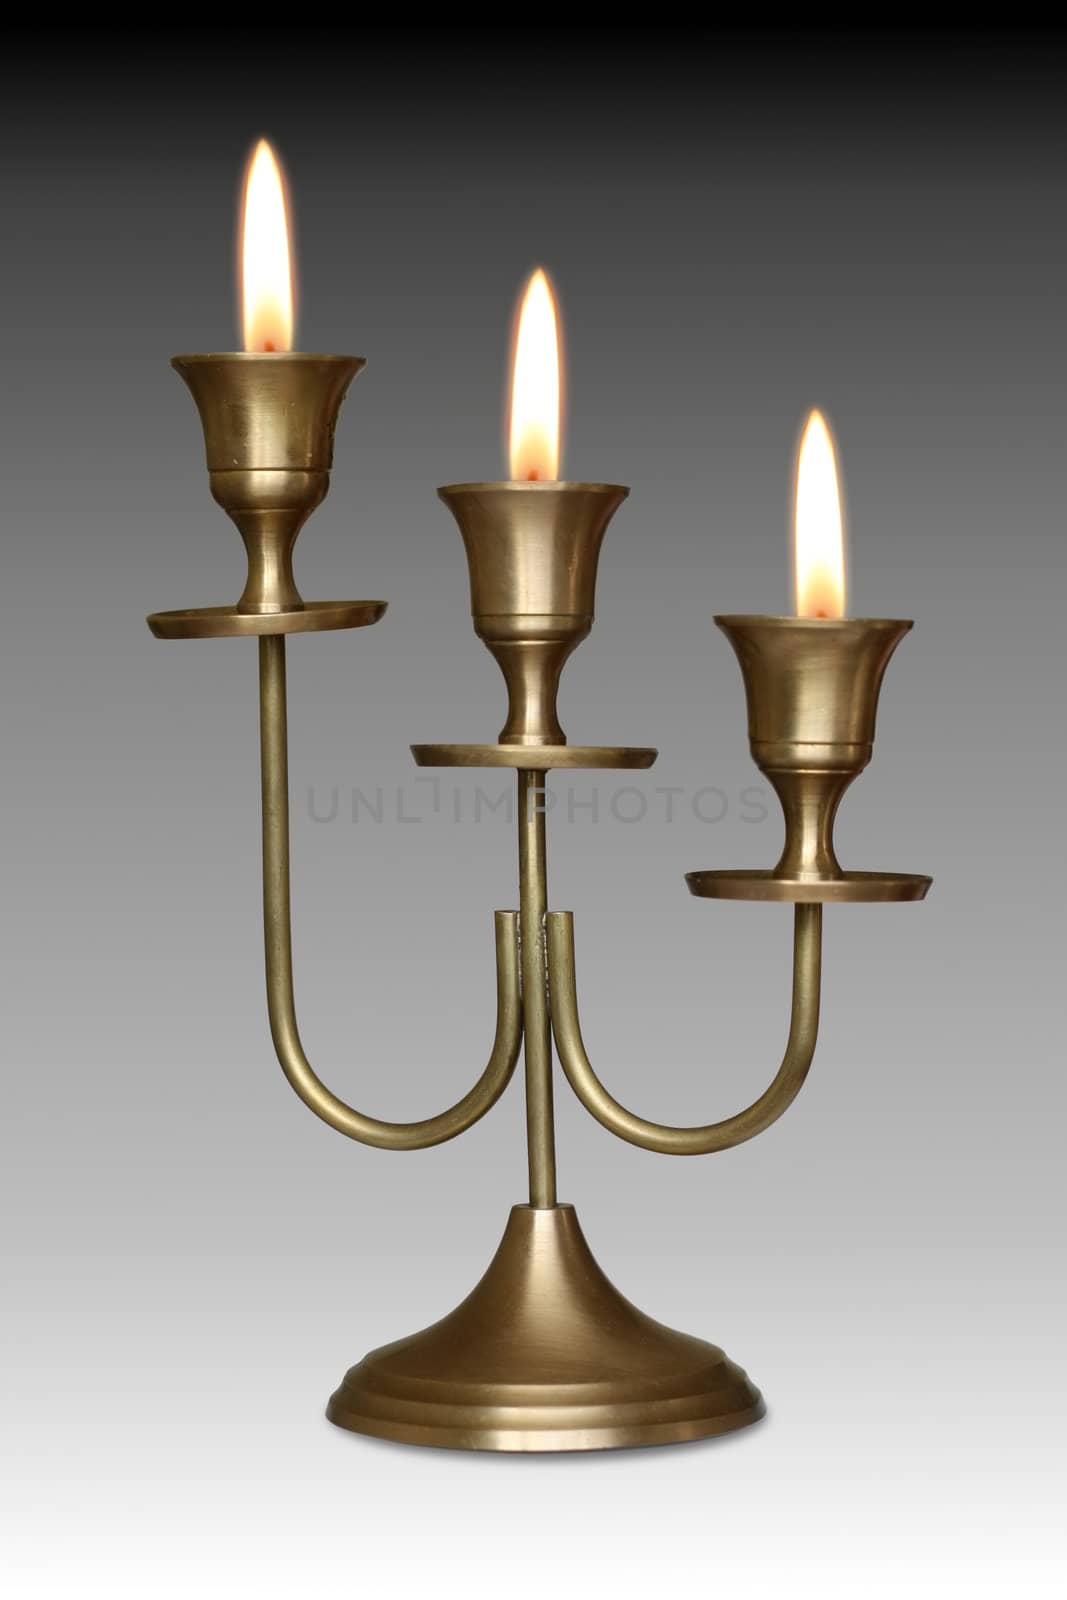 Three - branched candlestick and Votive Candles Burning